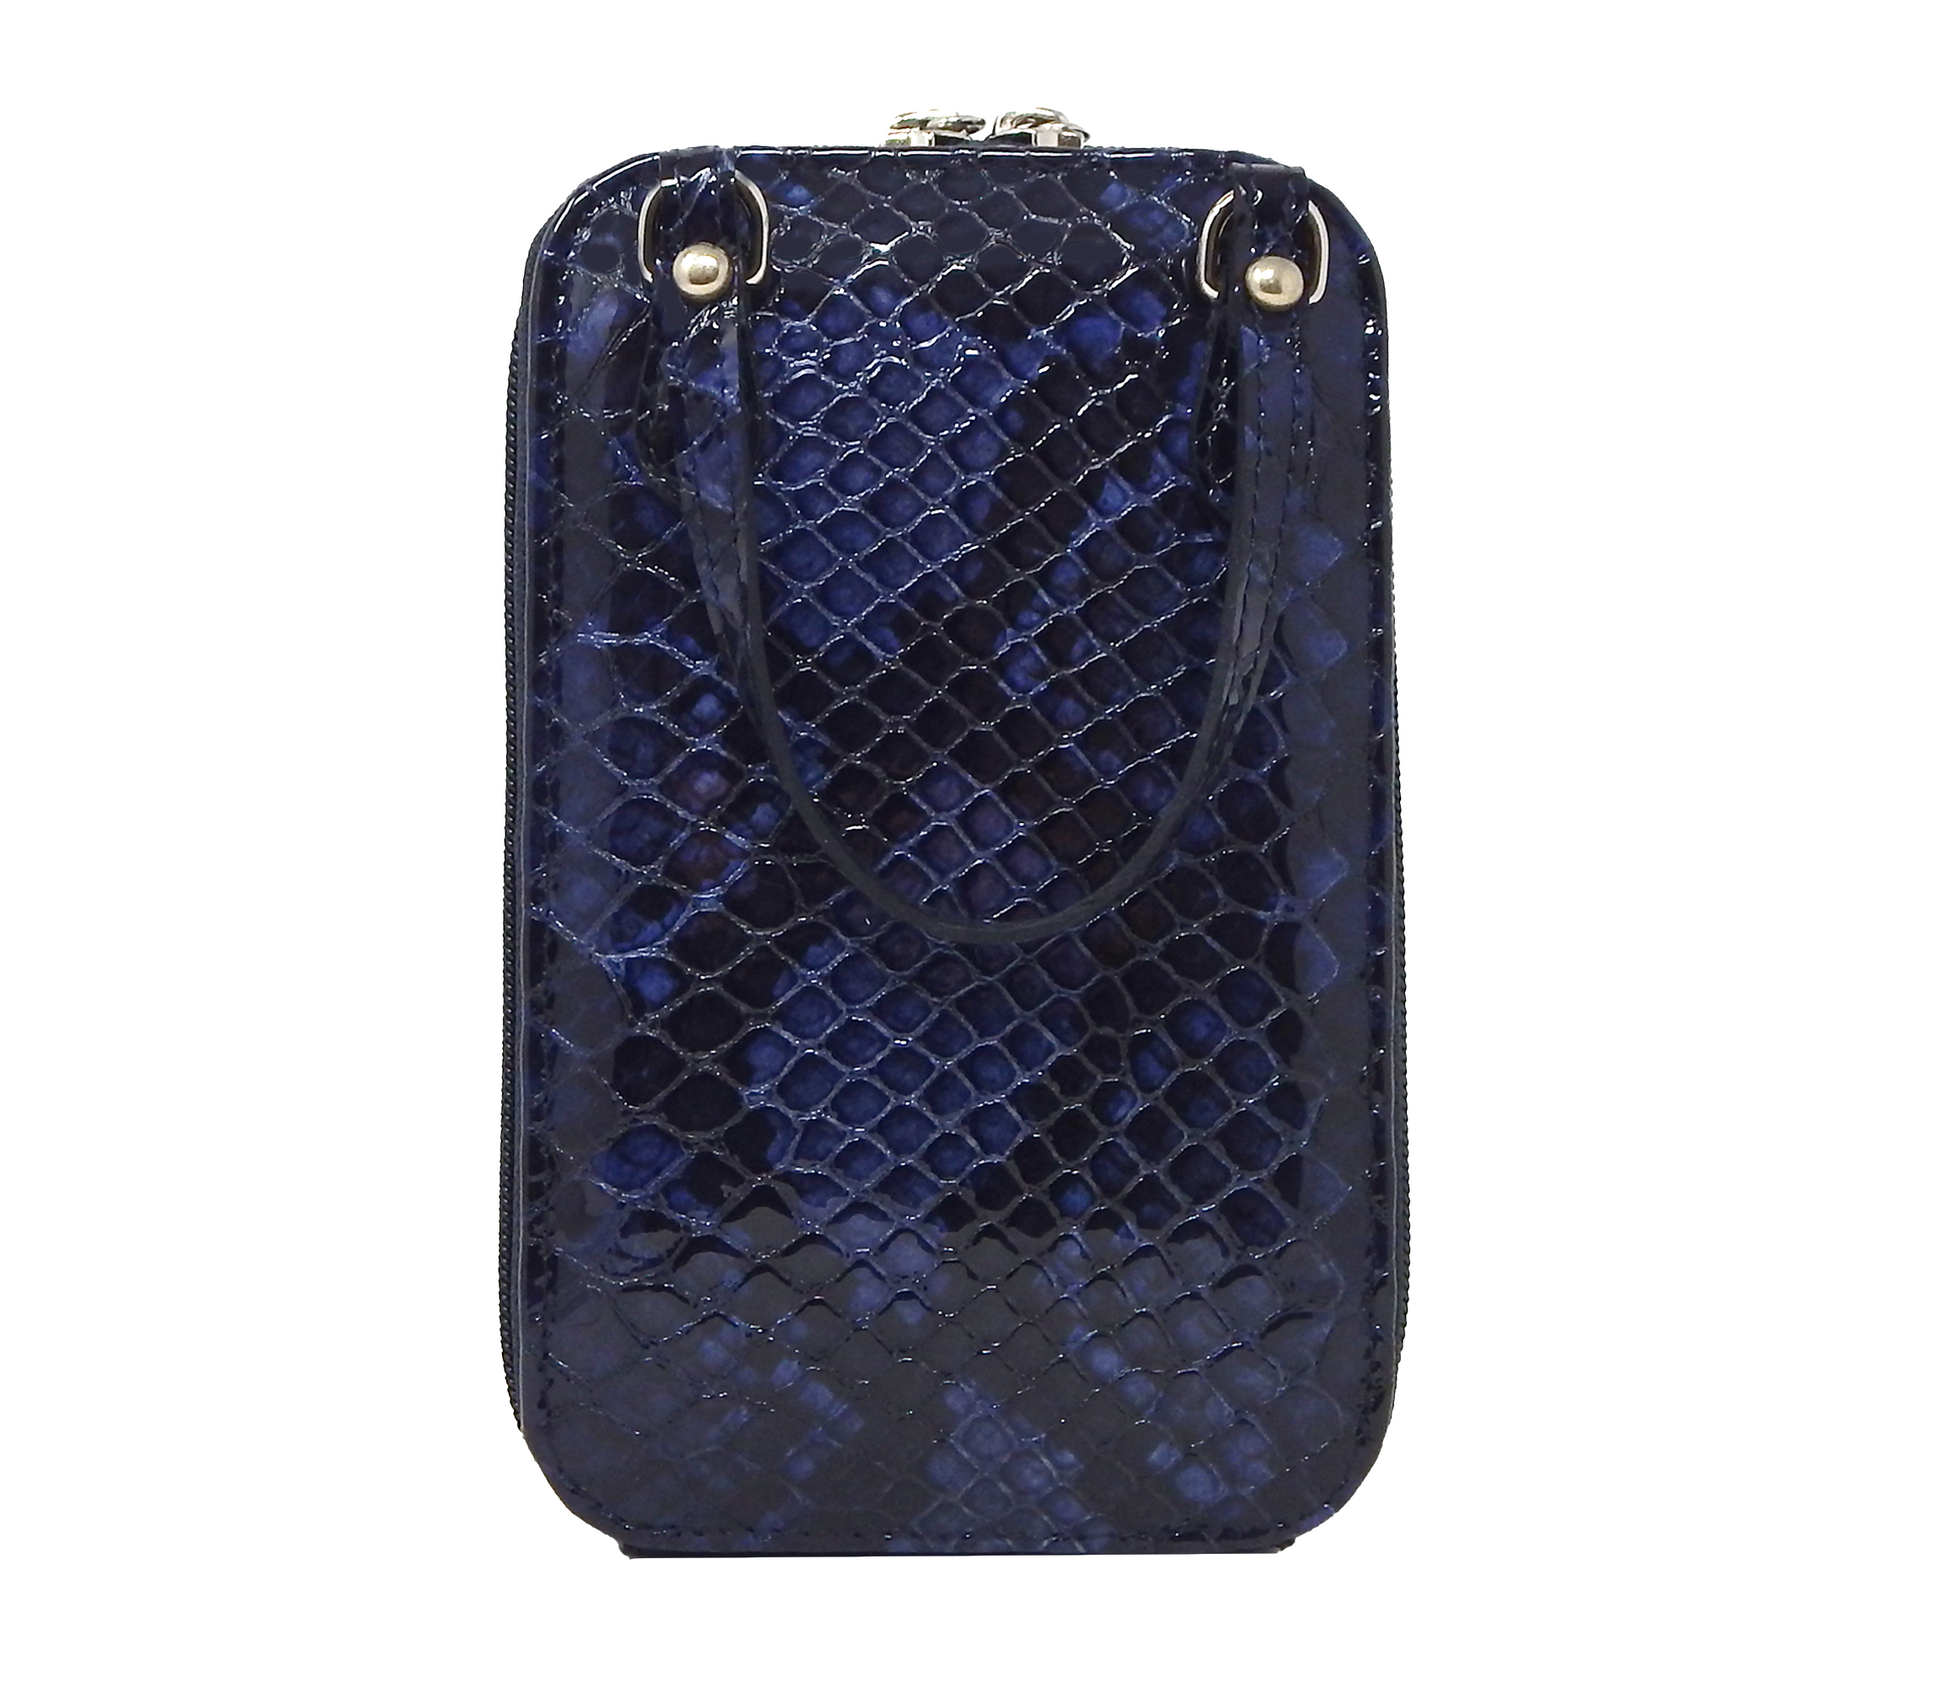 #color_ Navy | Cavalinho Gallop Patent Leather Phone Purse - Navy - 28170278.03_3